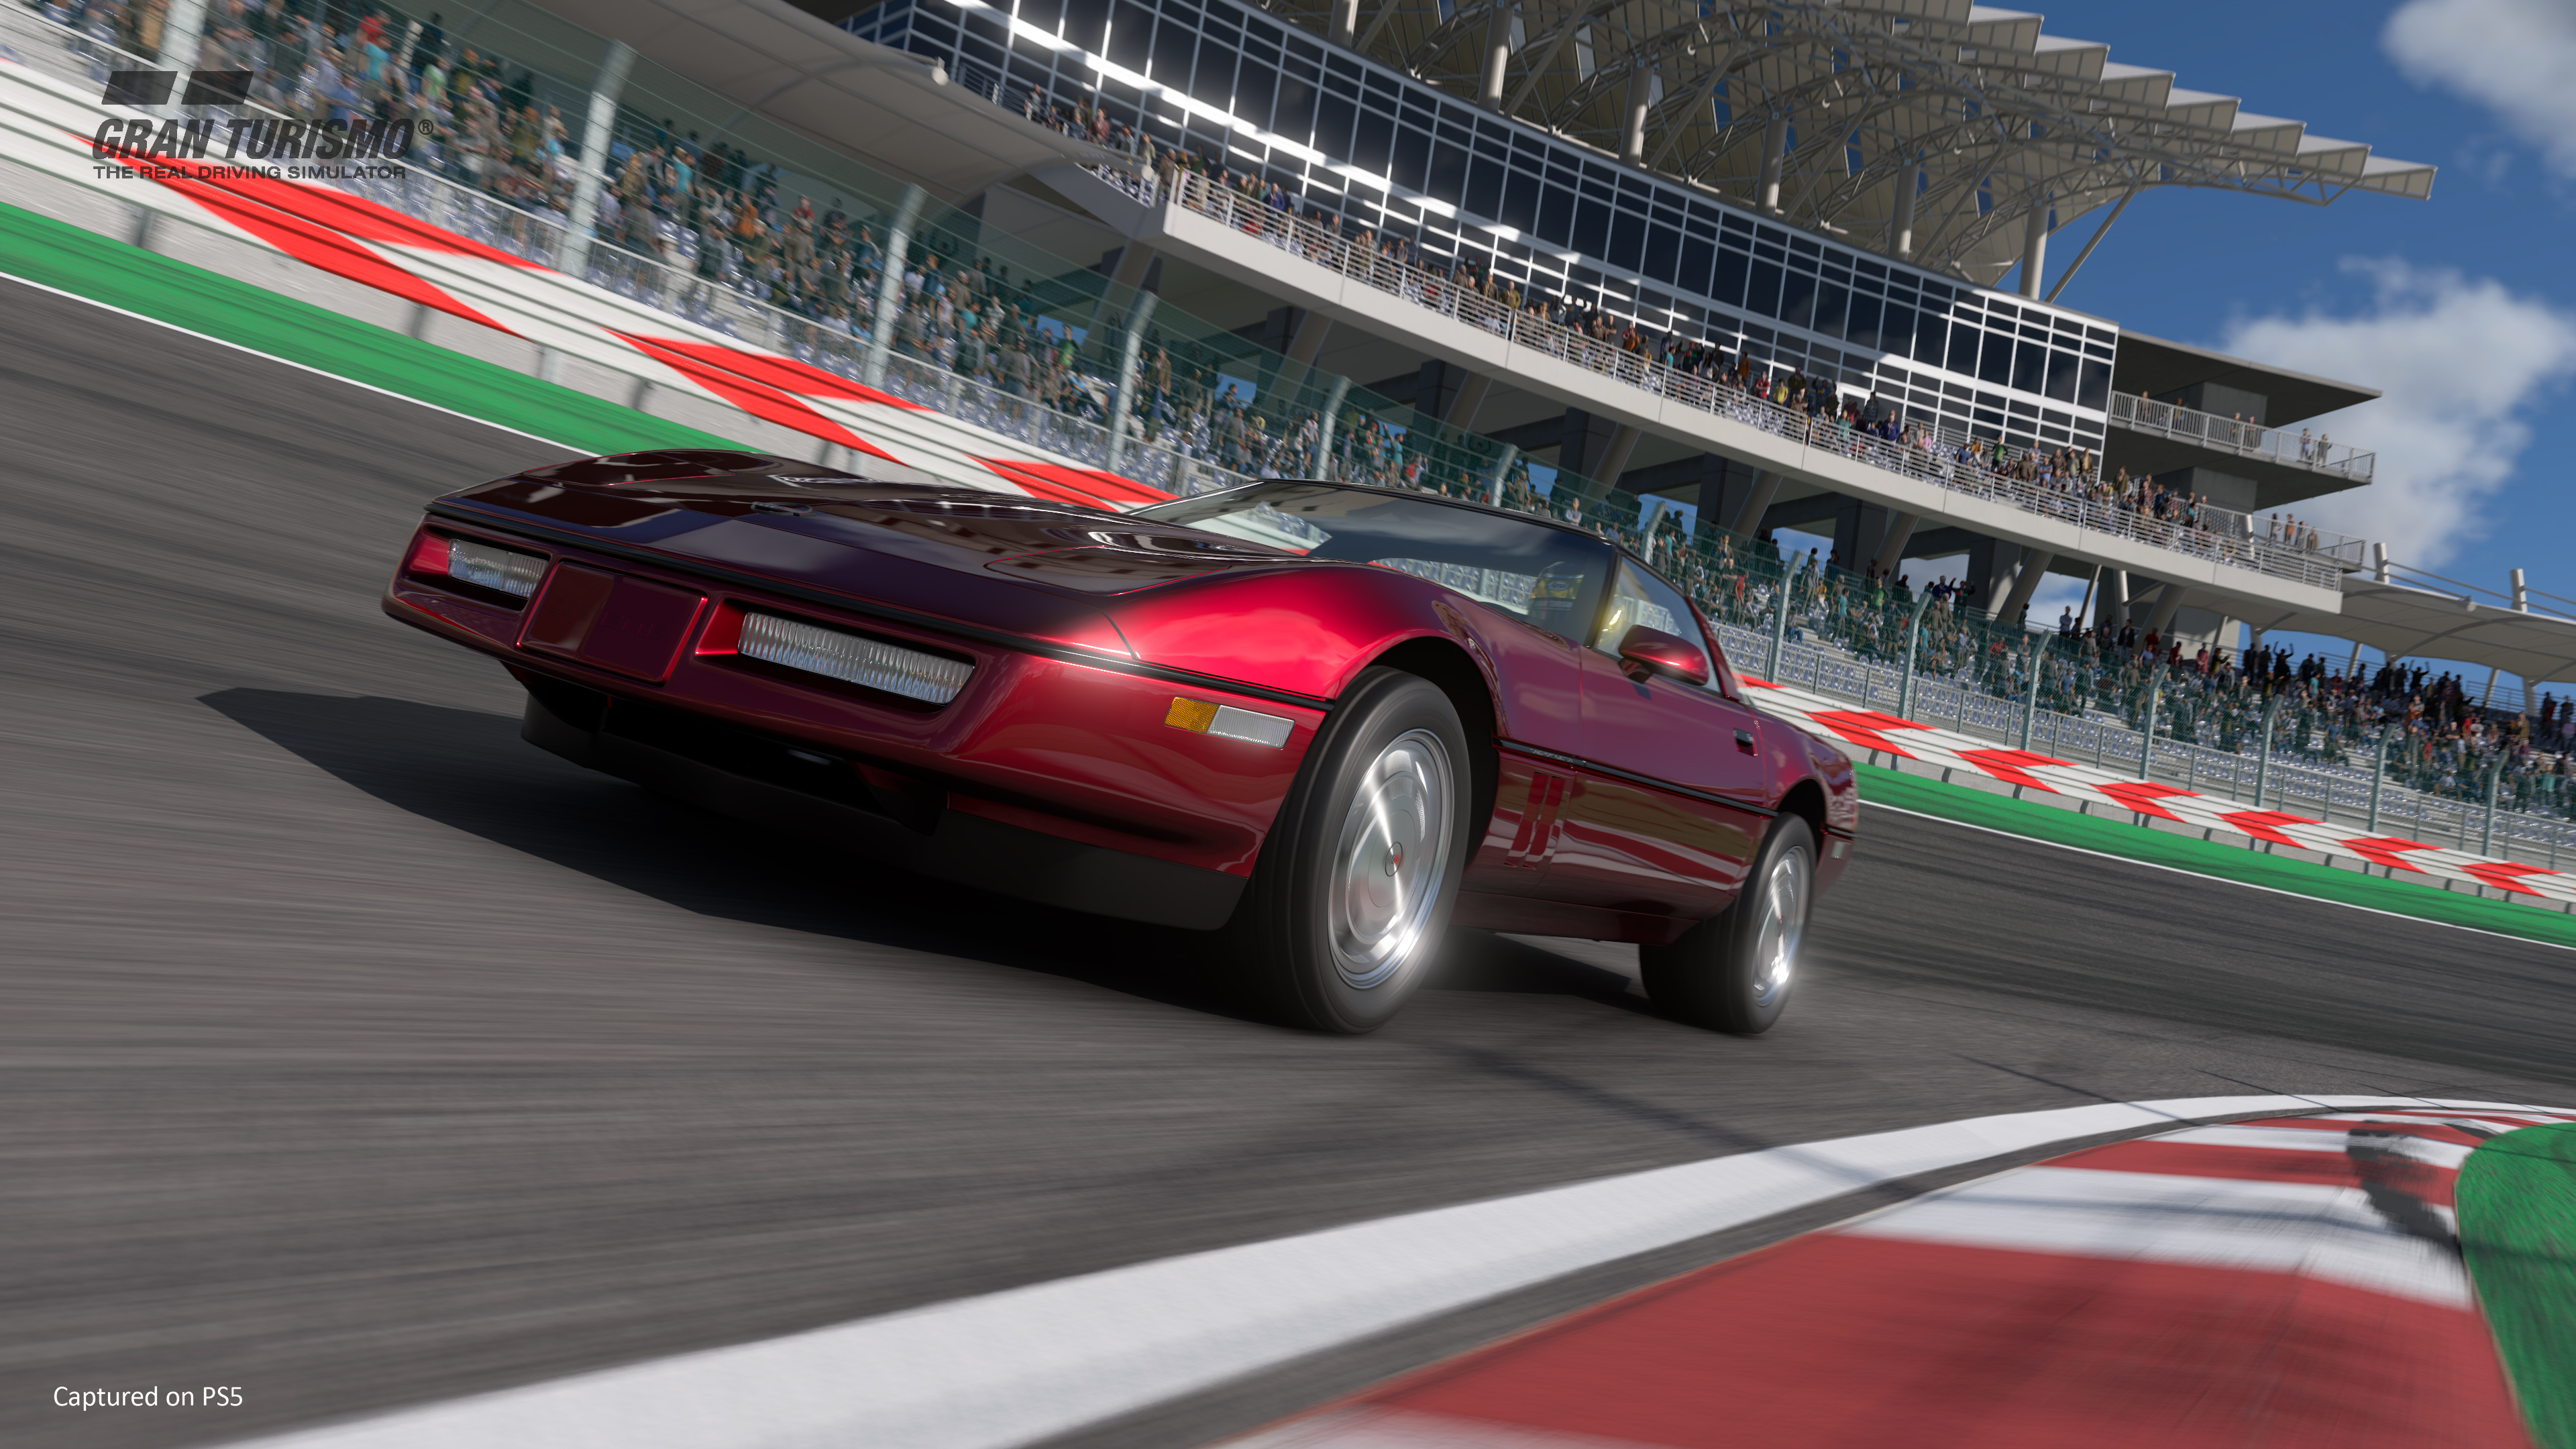 Which racing wheel should you choose to play Gran Turismo 7? - Thrustmaster